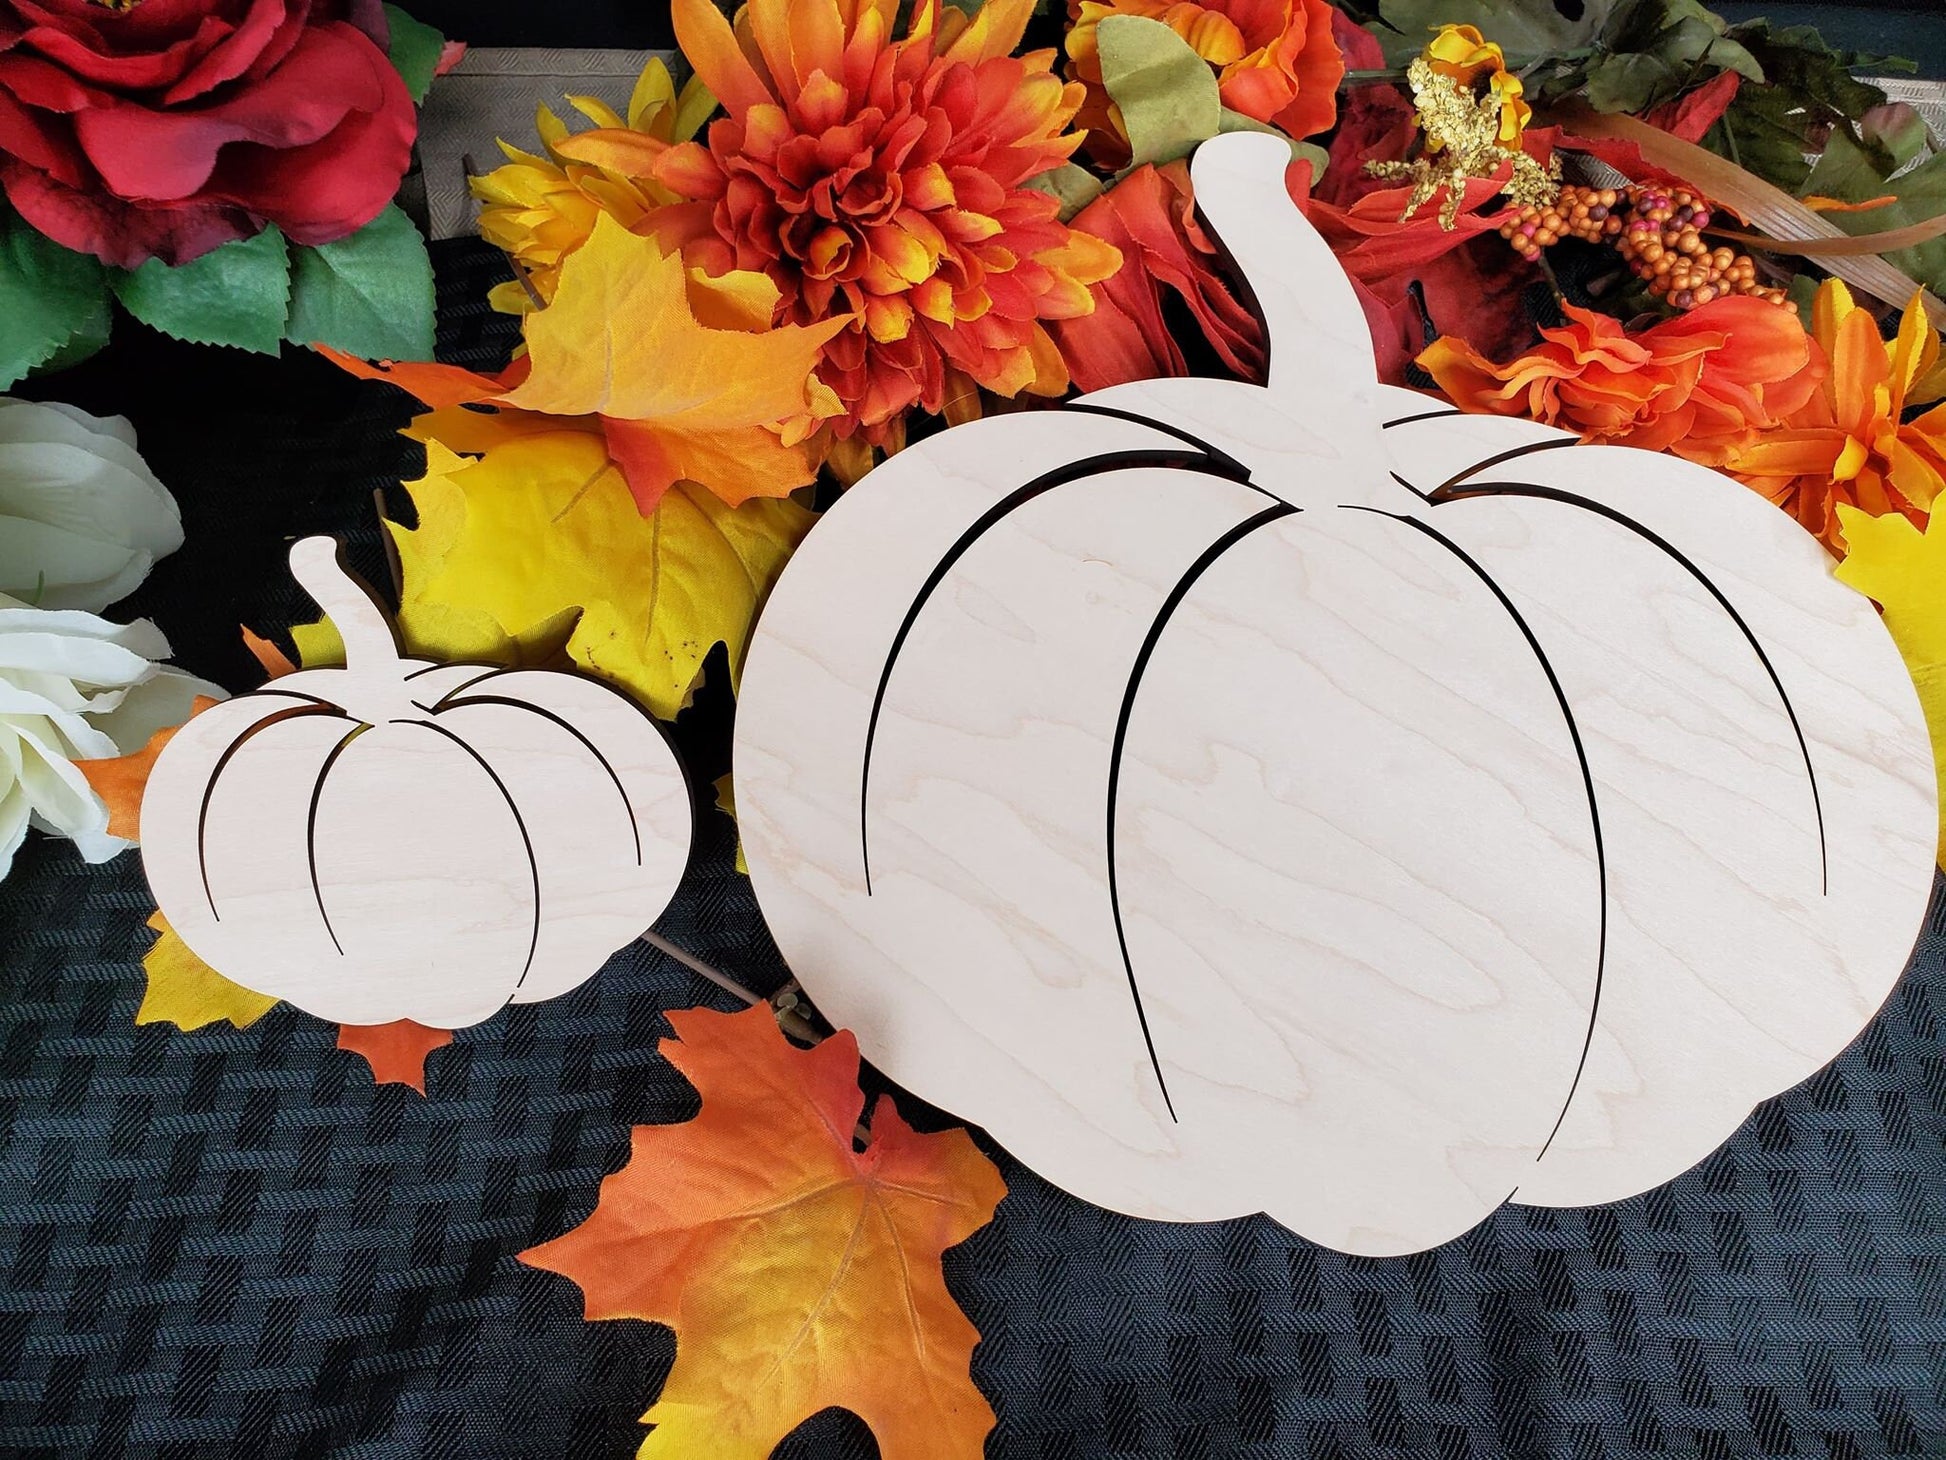 Kid Craft. Wooden Pumpkin Cut Out. Halloween Wooden Blank. Unfinished – C &  A Engraving and Gifts